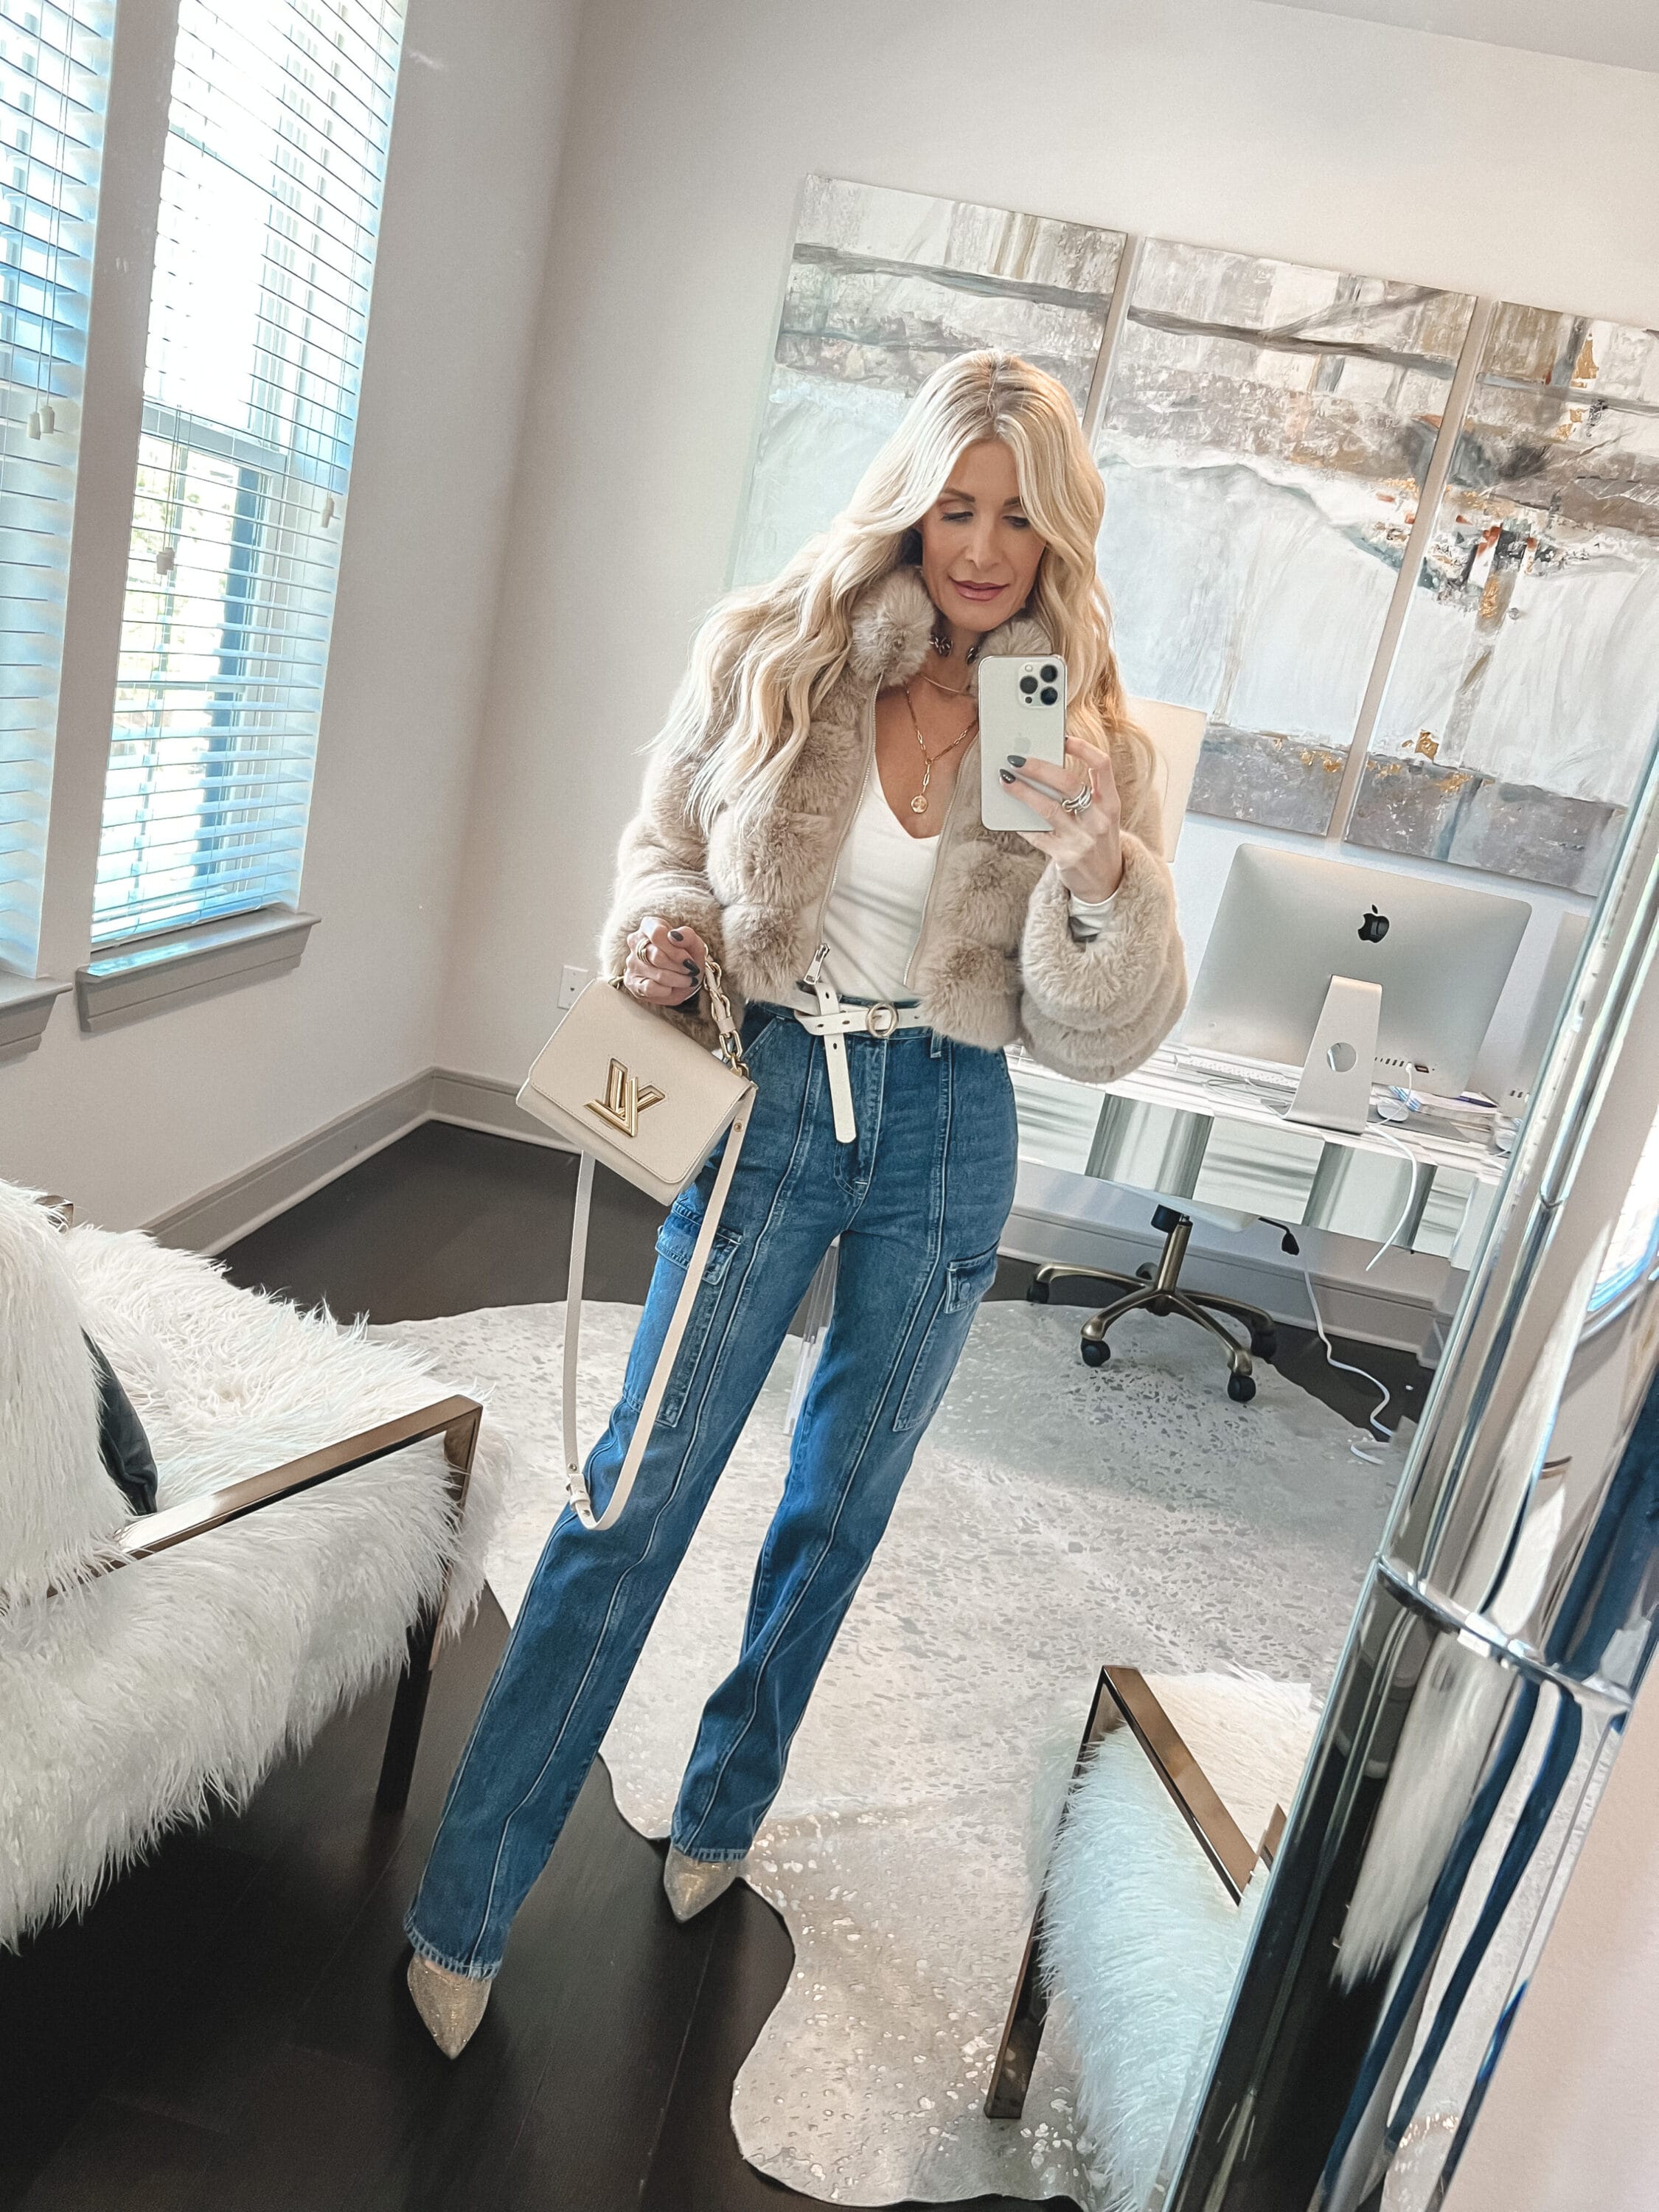 Over 40 fashion blogger from dallas wearing just cargo pants with a fur coat and white bodysuit instead of everything cargo which is a trend to ditch in 2023.